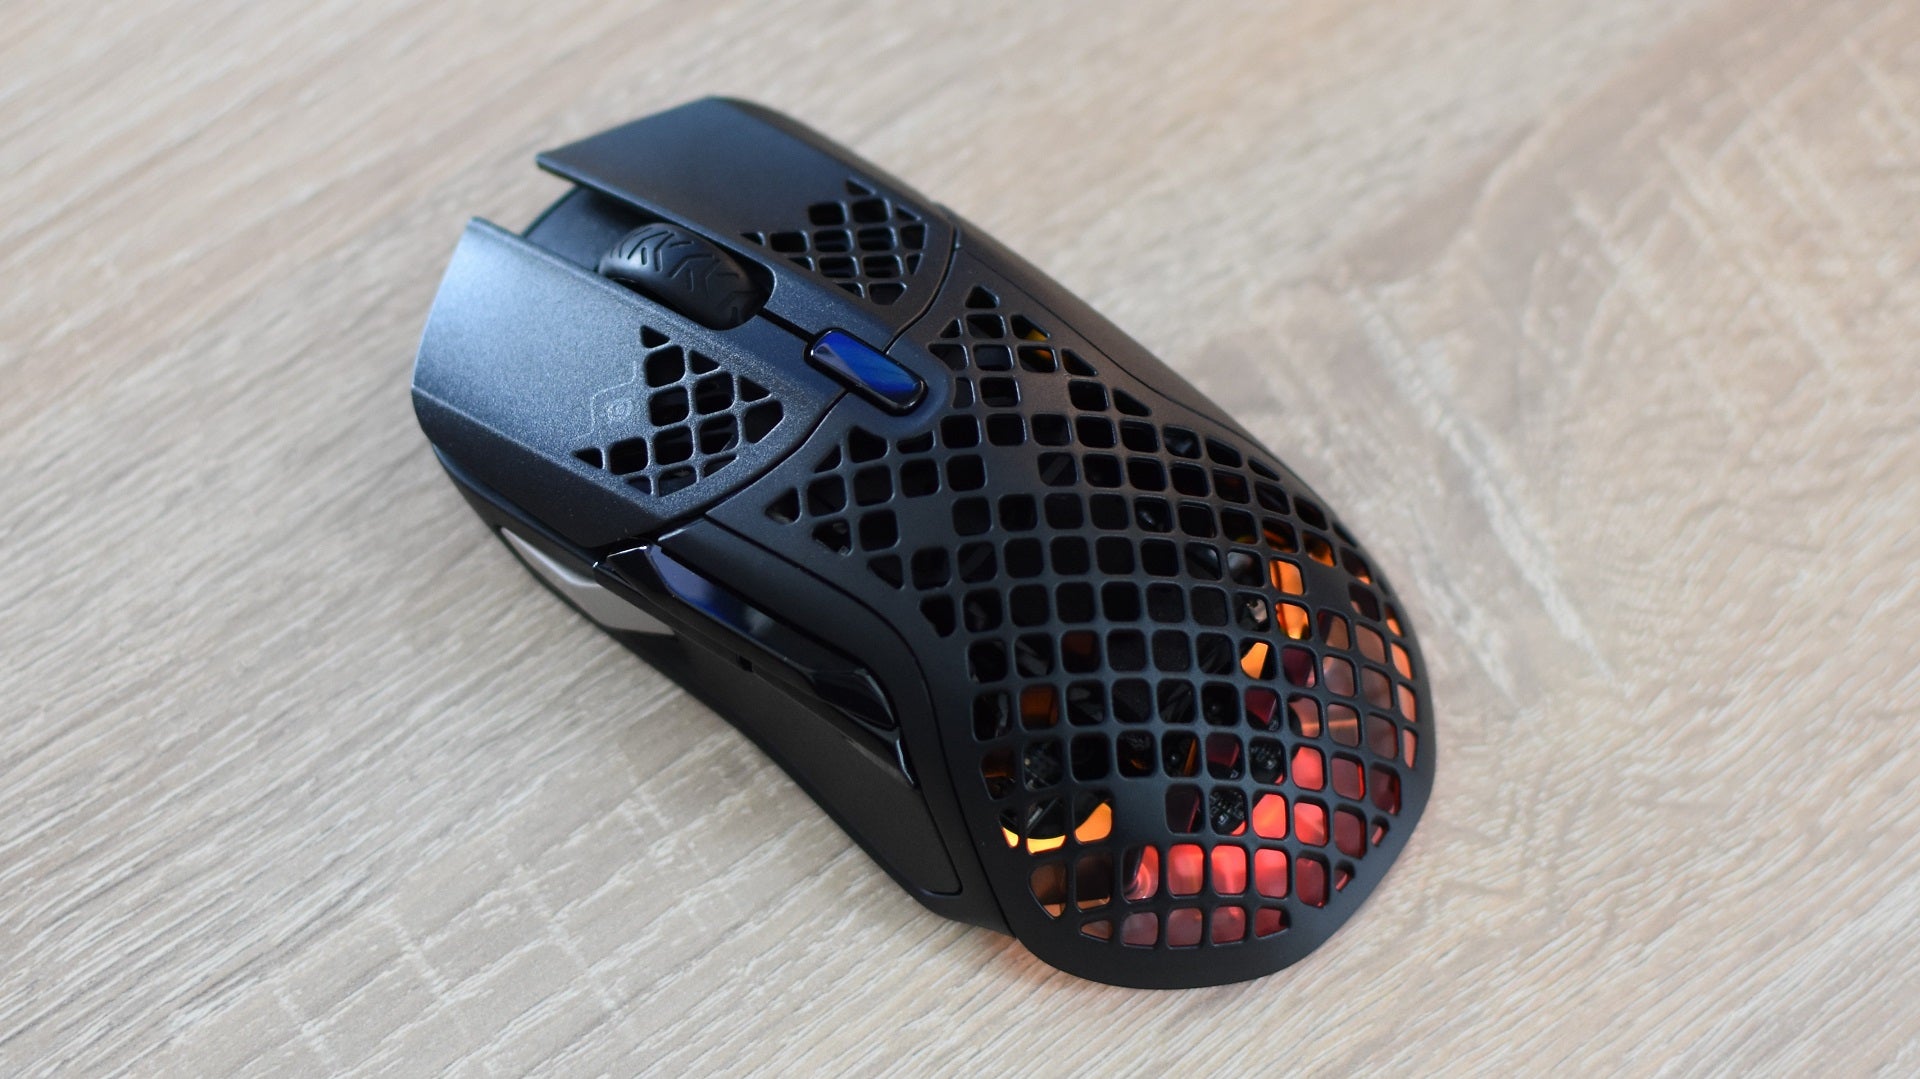 The SteelSeries Aerox 5 Wireless gaming mouse on a desk.